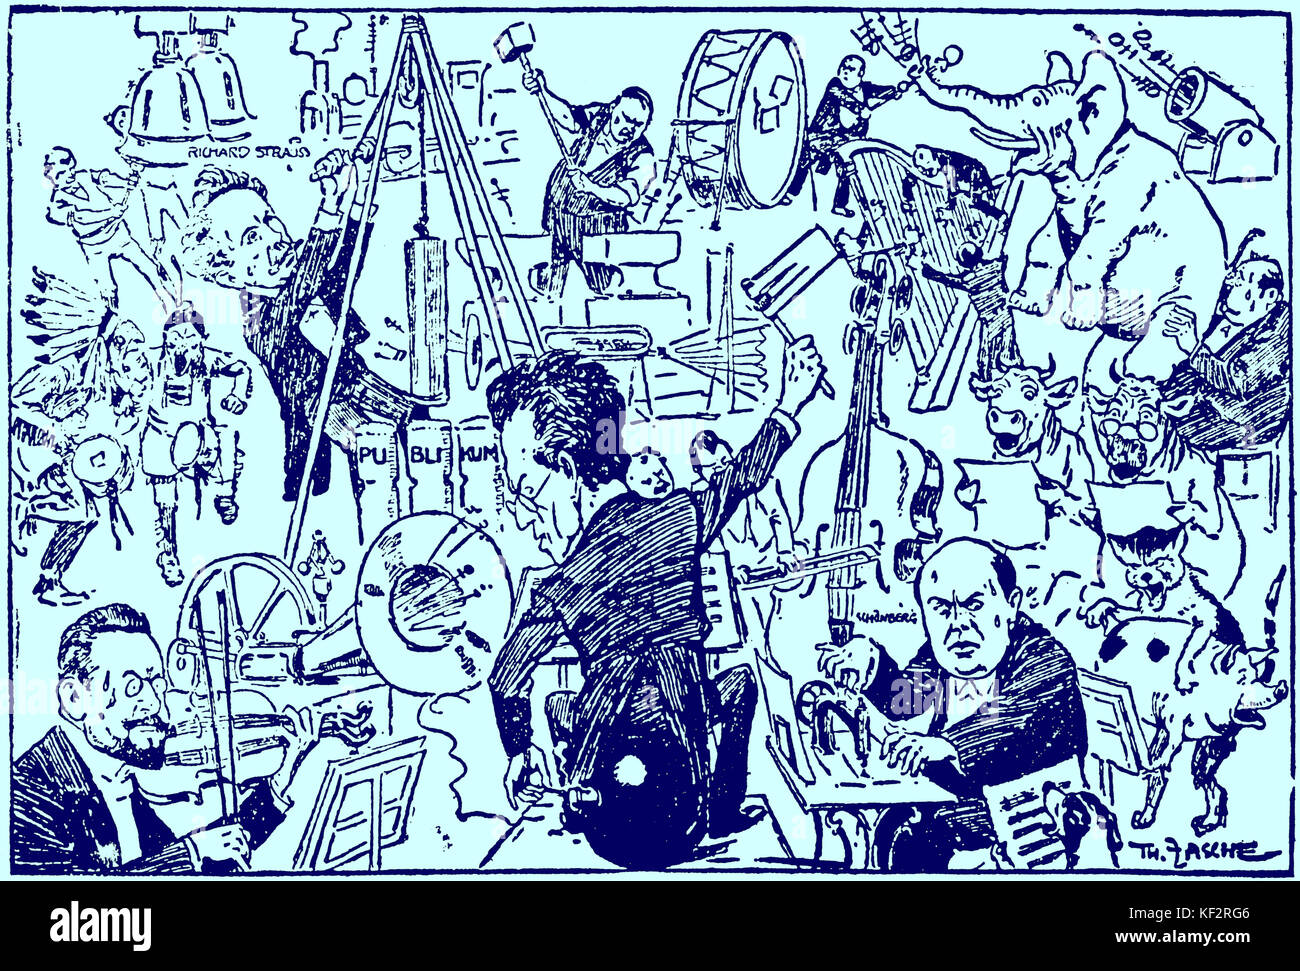 Gustav Mahler in caricature by Theo Zasche. 'The Modern Orchestra'. Austrian composer, 1860-1911.  Mahler, sitting on bomb, conducts with a rattle, Schoenberg works at a sewing machine, Strauss drops a heavy weight on the public, Arnold Rose (Mahler's brother-in-law) plays a double violin with two bows. 1st pub. 'Illustrierten Wierner Extrablatt', 31st March 1907. Stock Photo